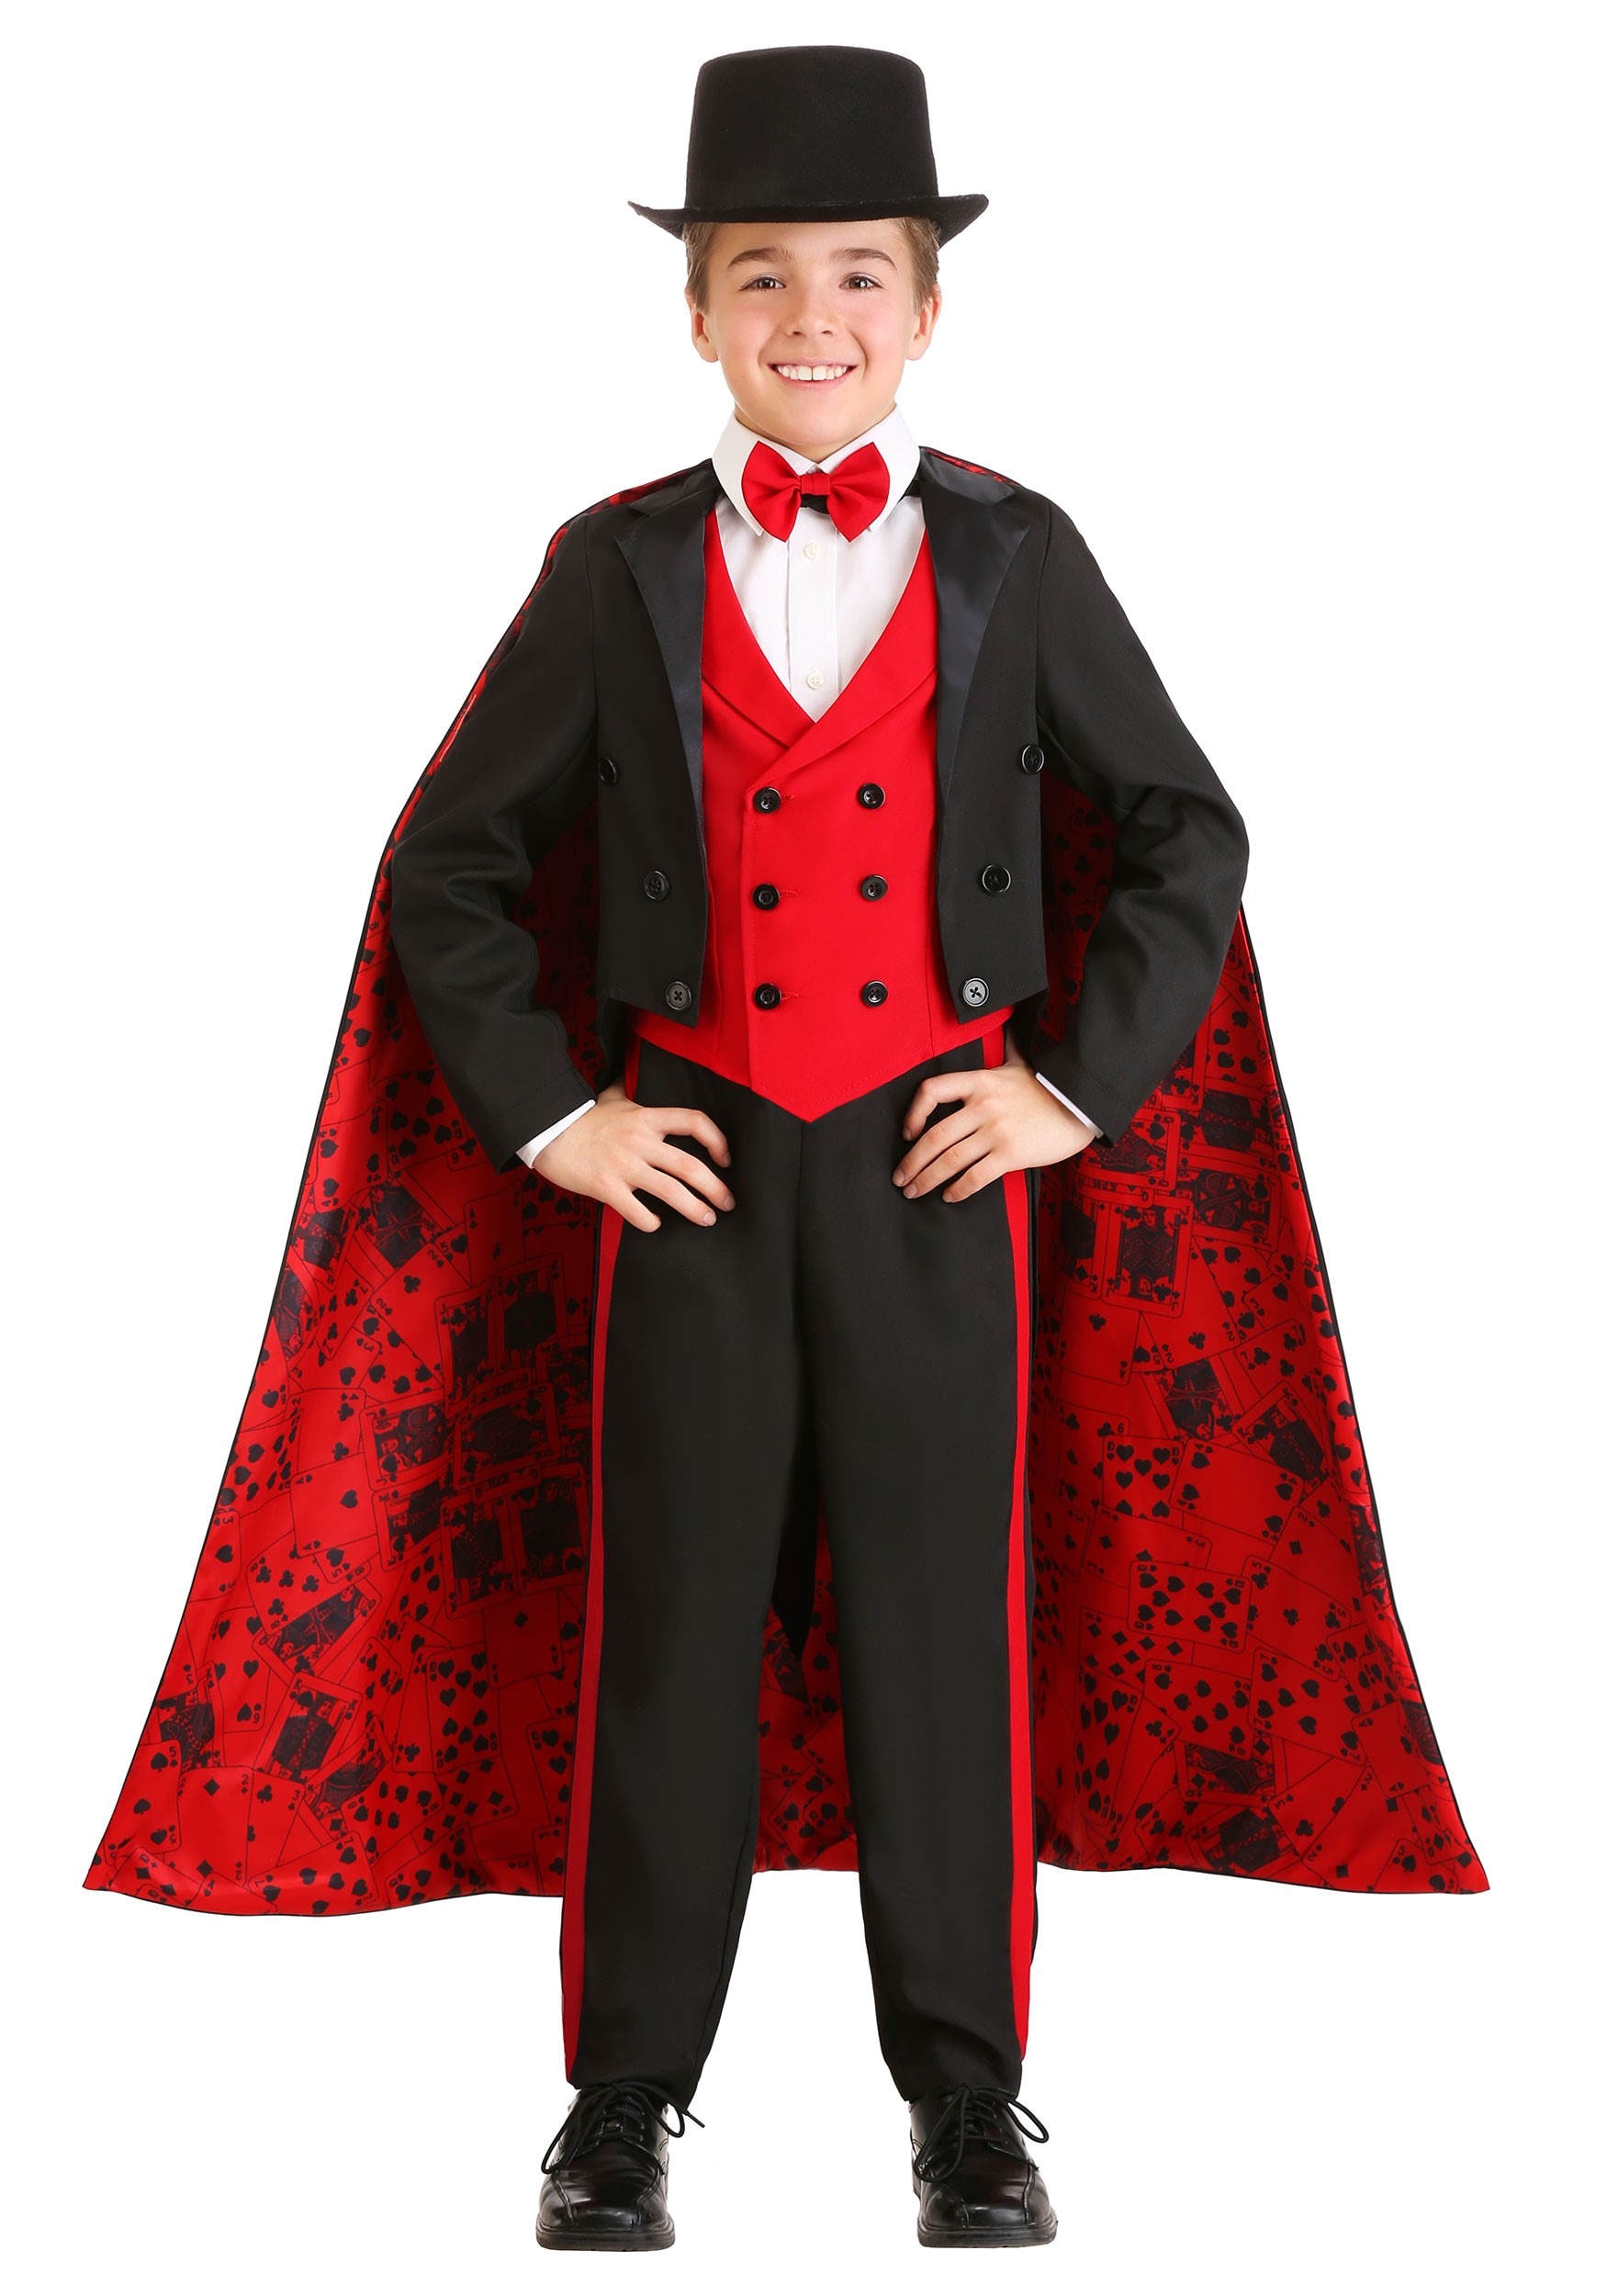 Photos - Fancy Dress Deluxe FUN Costumes  Magician Costume for Boy's Black/Red FUN0479CH 